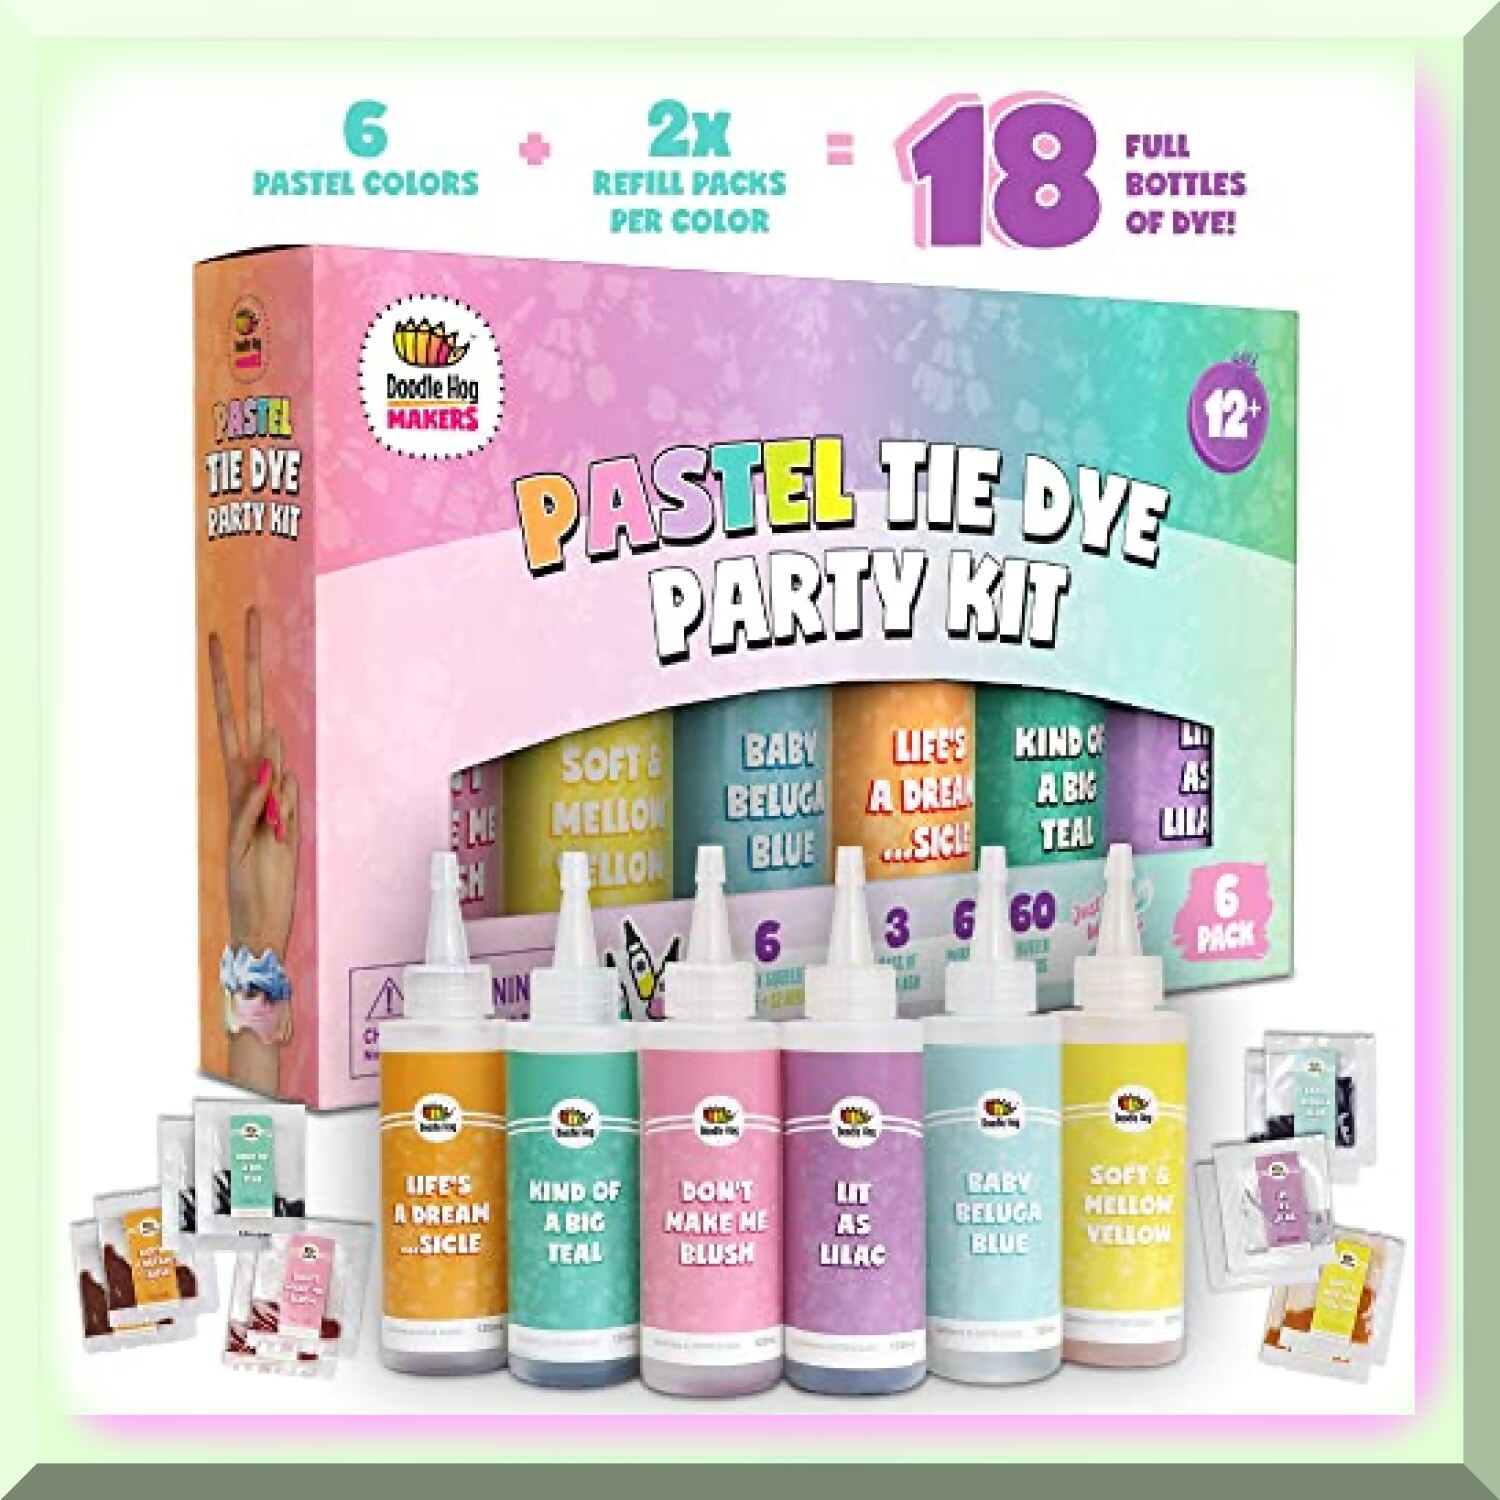 Rainbow Dreams Tie Dye Party Pack - Vibrant DIY Kit for Large Groups, Girls' Shirt, Adults - 18 Bottles of Pastel Tie Dye Fun!